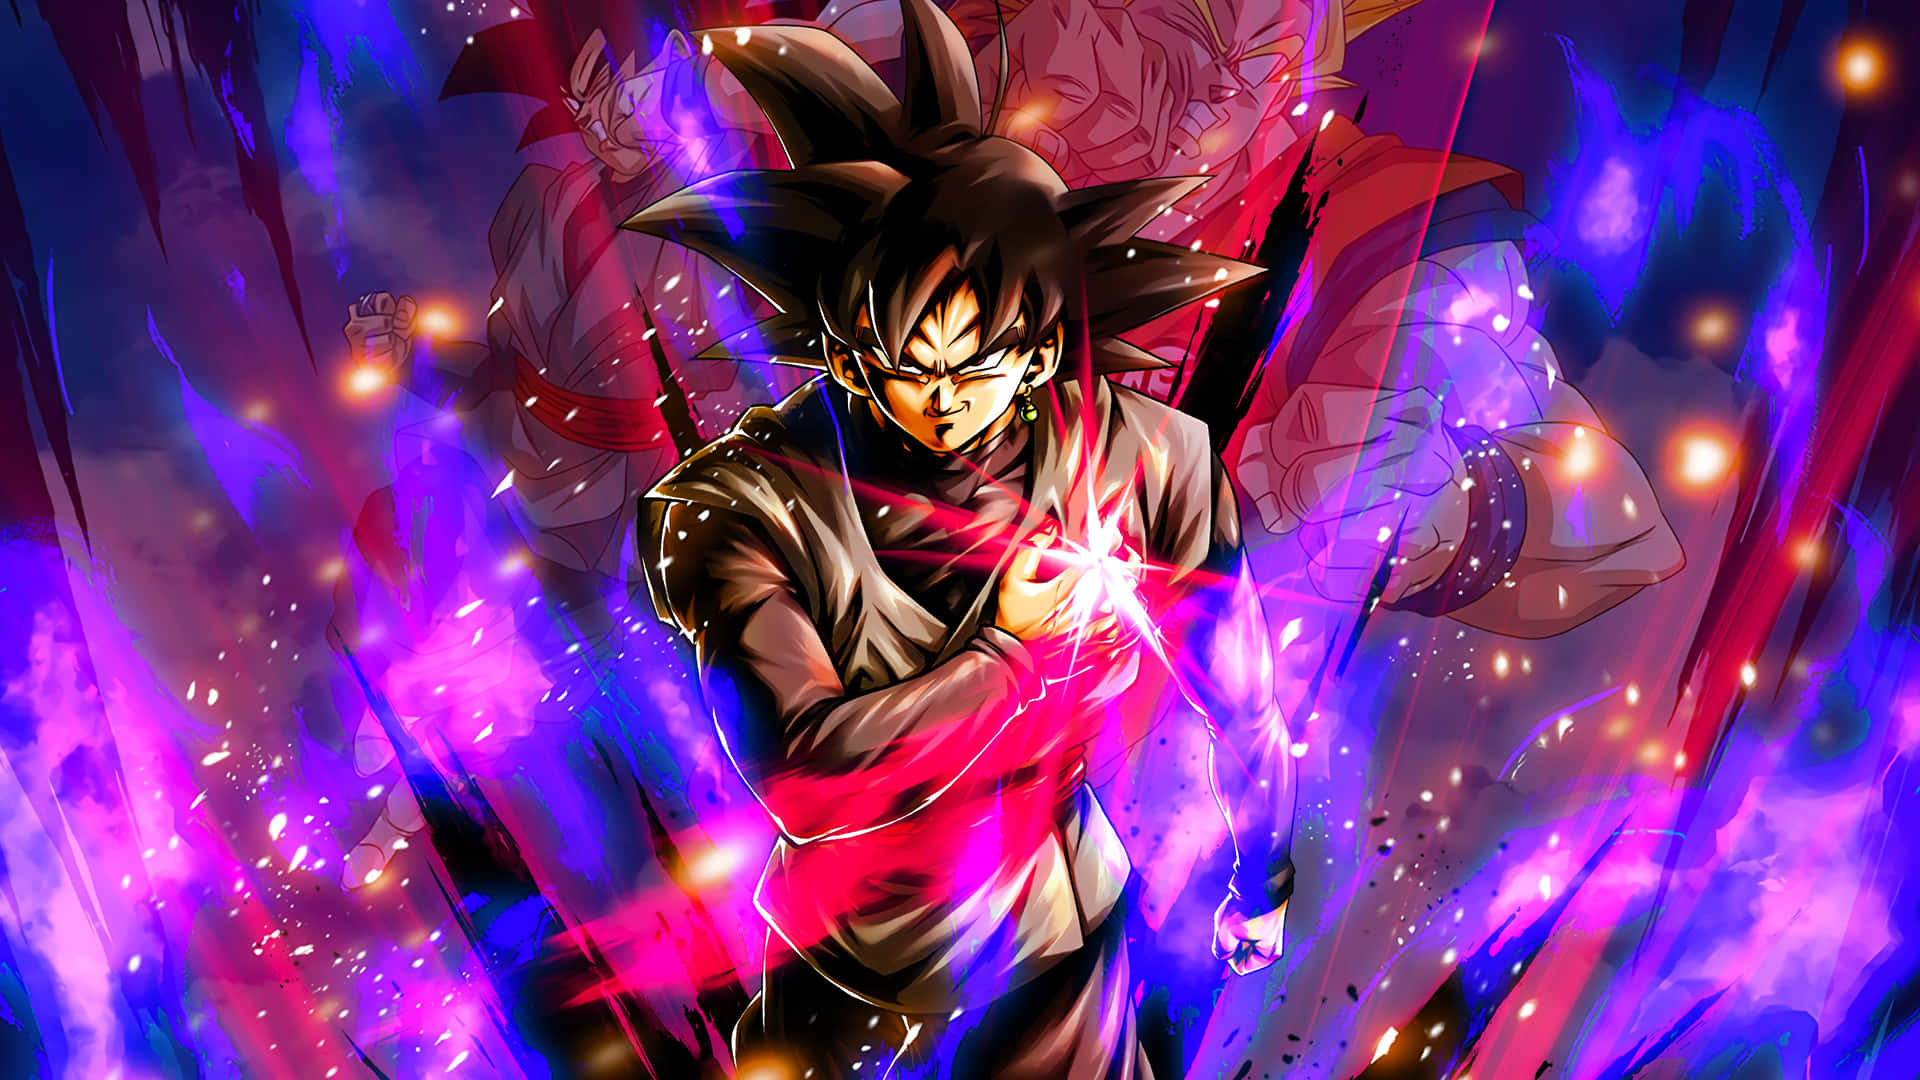 "The powerful Goku Black Supreme, ready to fight!" Wallpaper